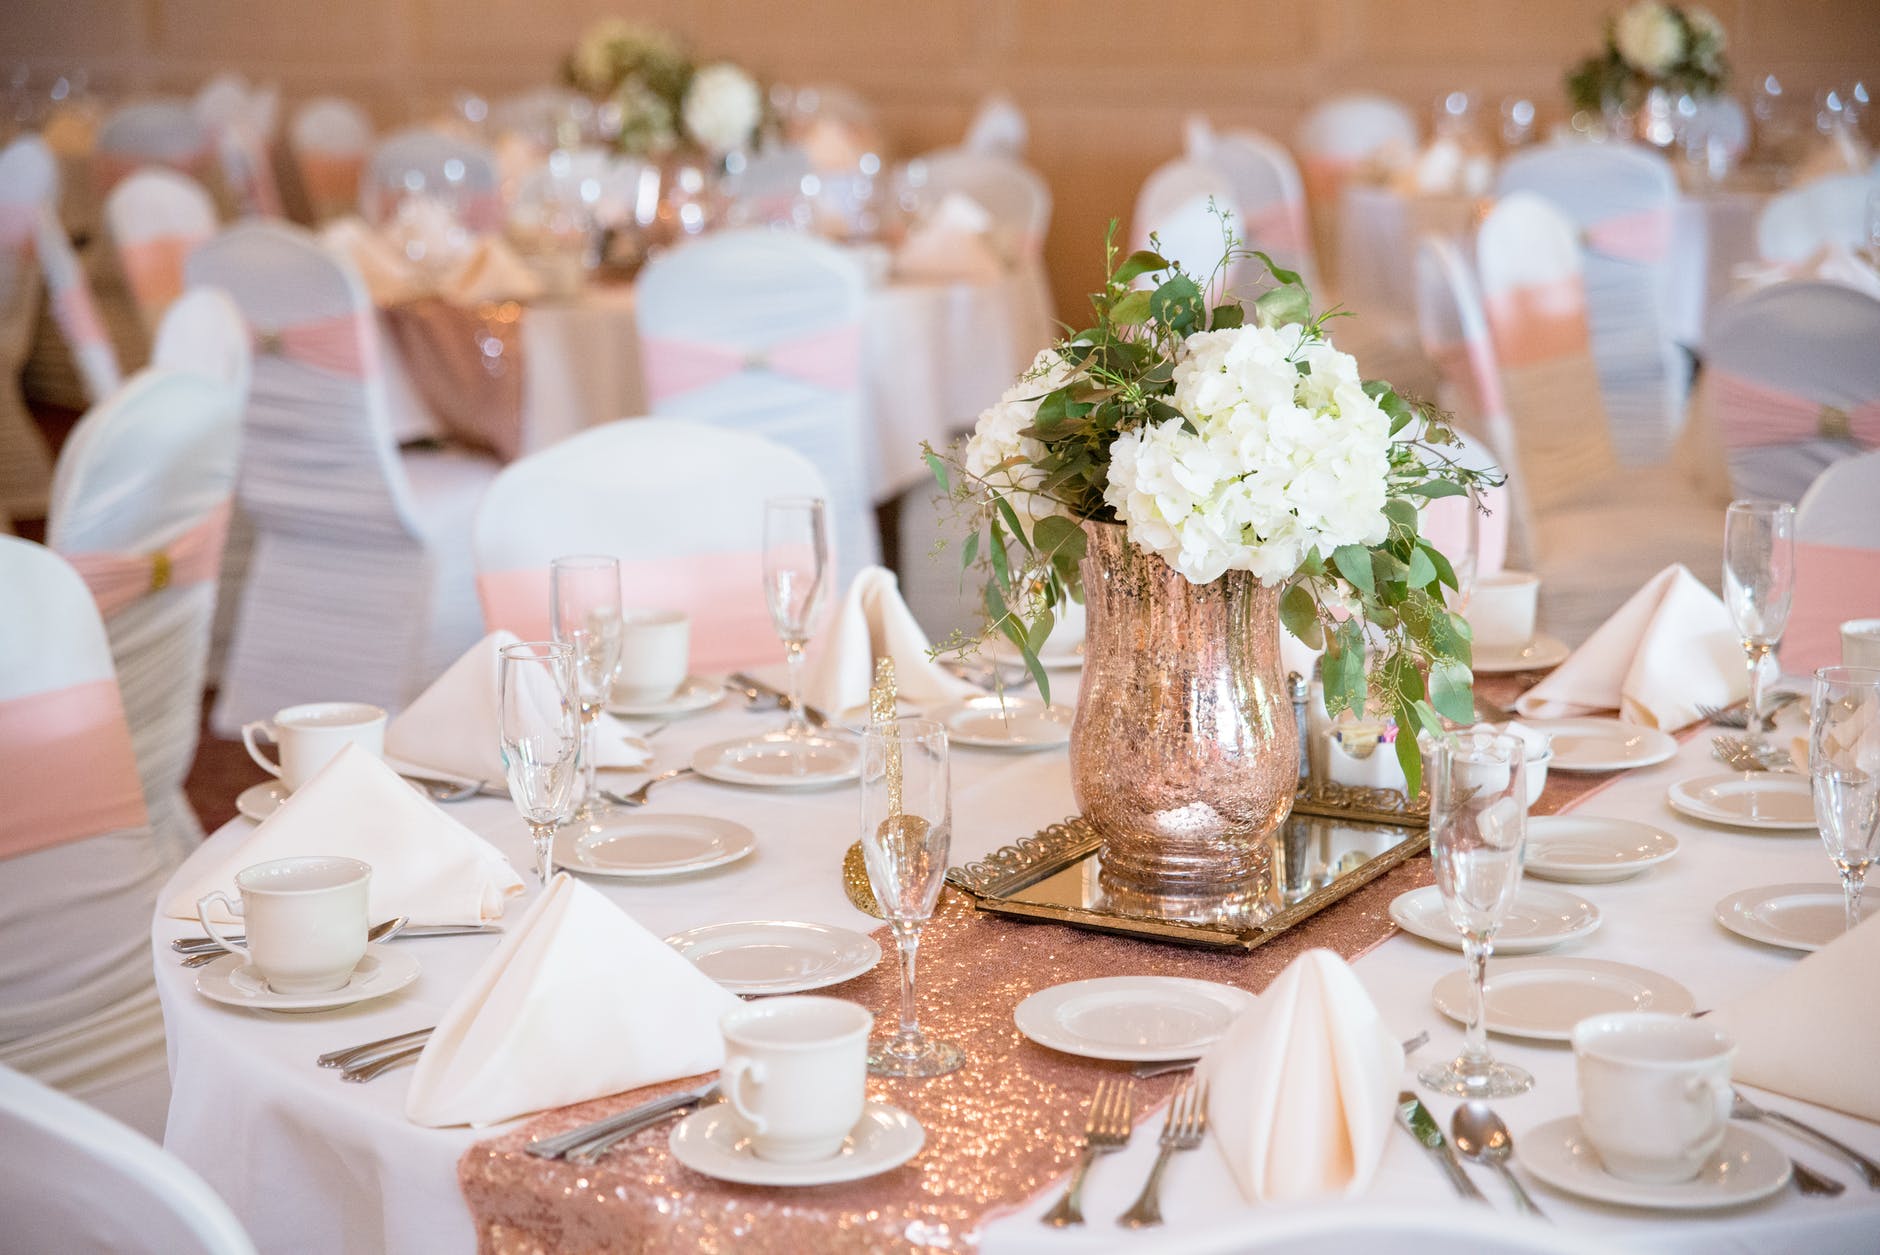 How Much Does it Cost to Cater a Wedding?